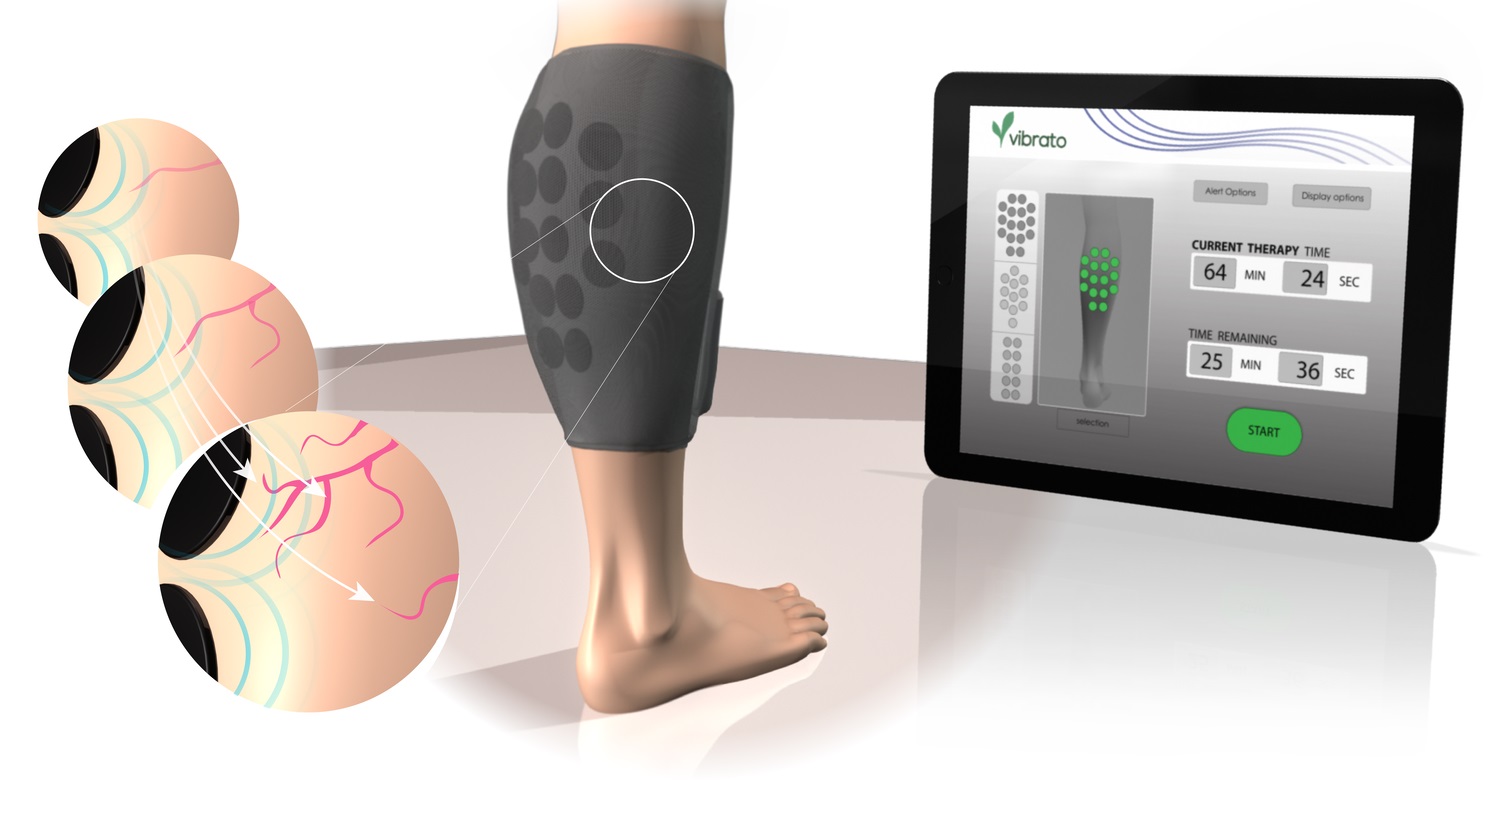 Image: The technology is the first wearable therapeutic ultrasound designed to promote vasodilation and vessel growth (Photo courtesy of Vibrato Medical)